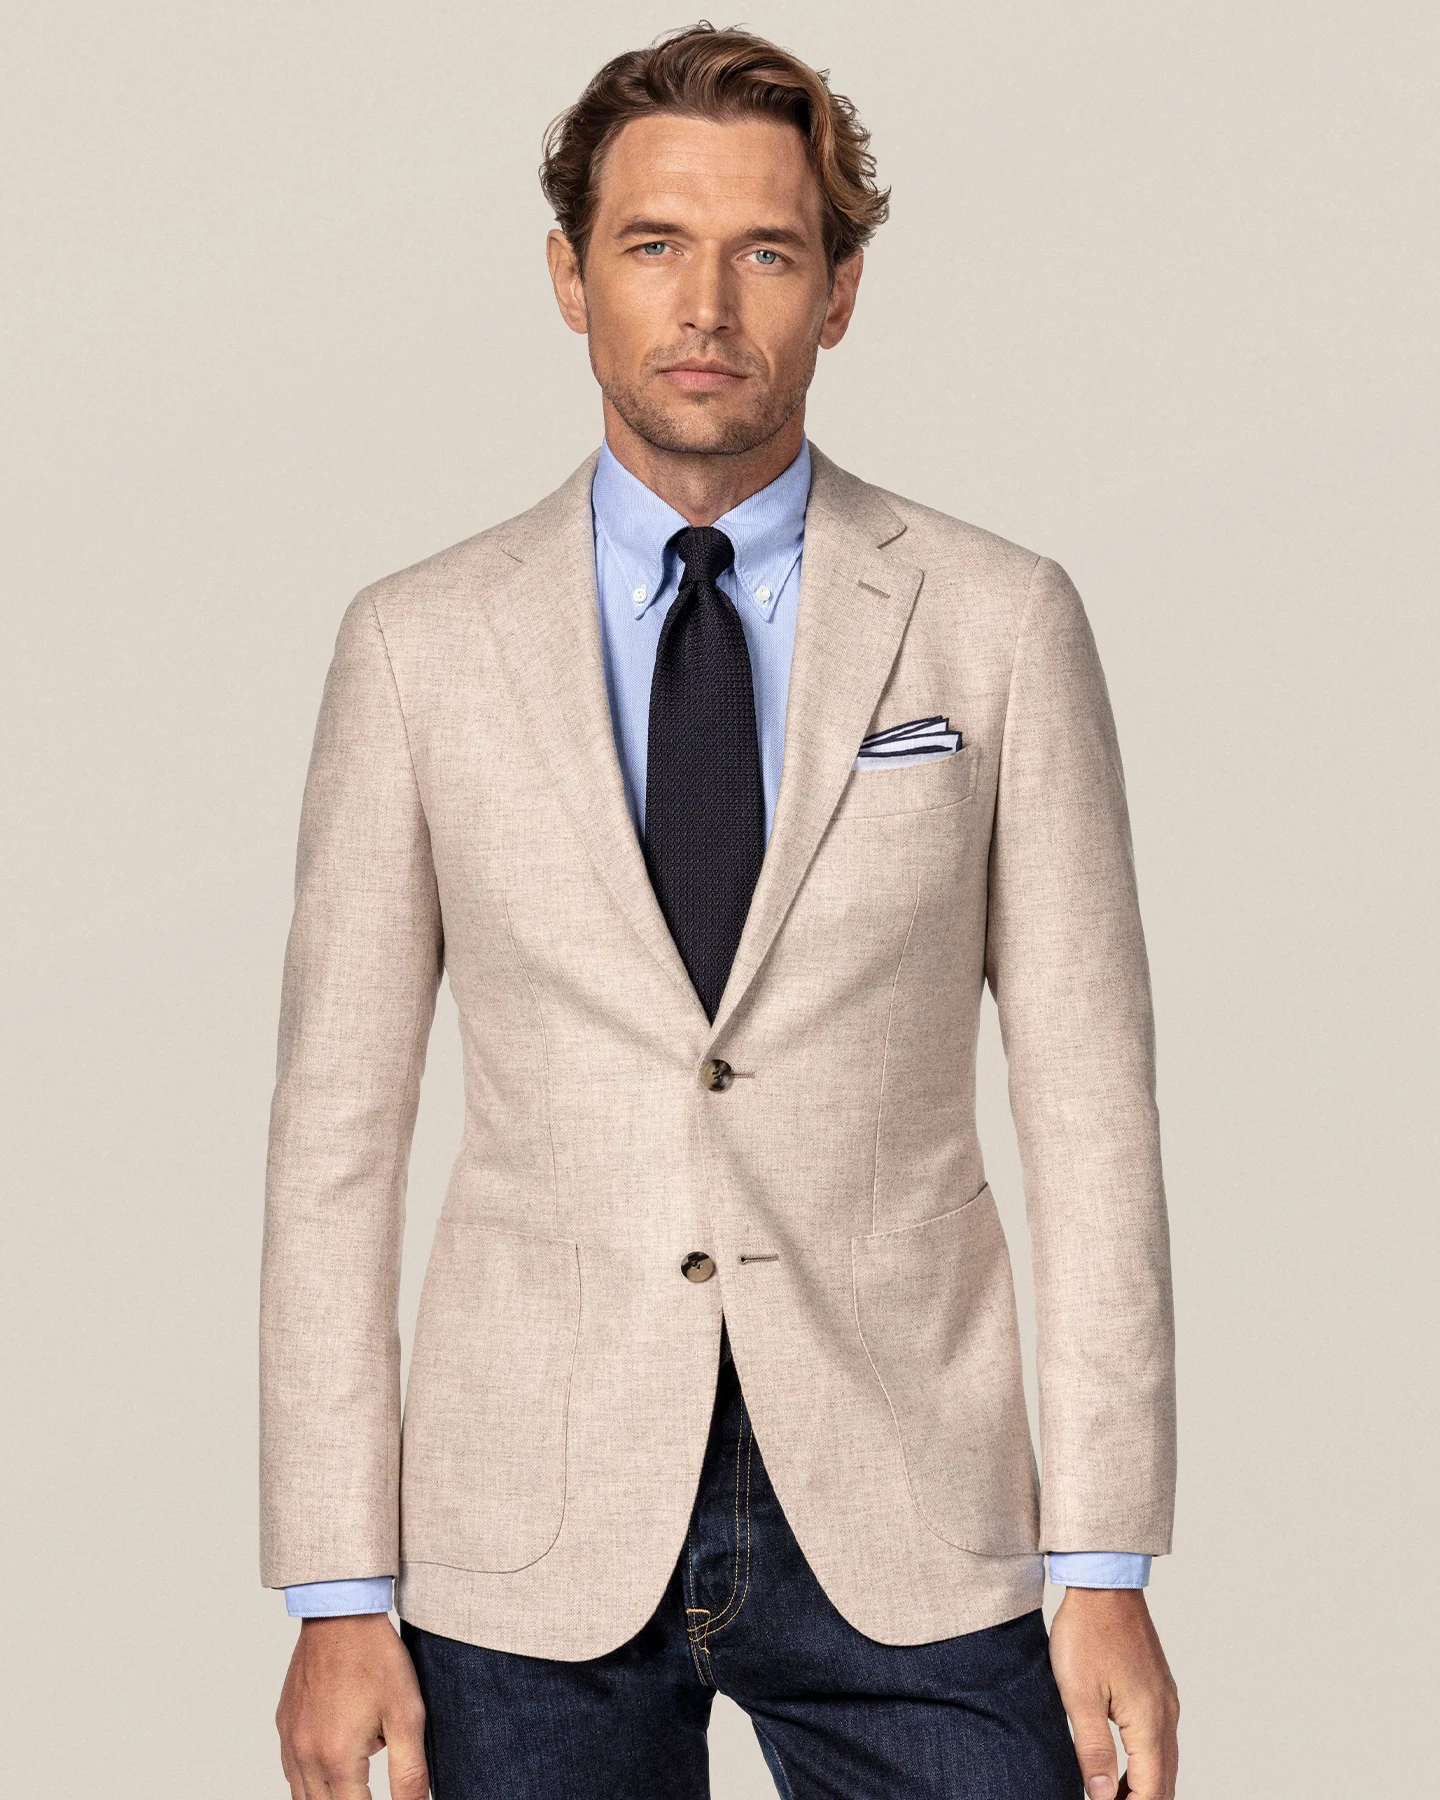 A well dressed man wearing a beige jacket, blue shirt and a matching grenadine tie